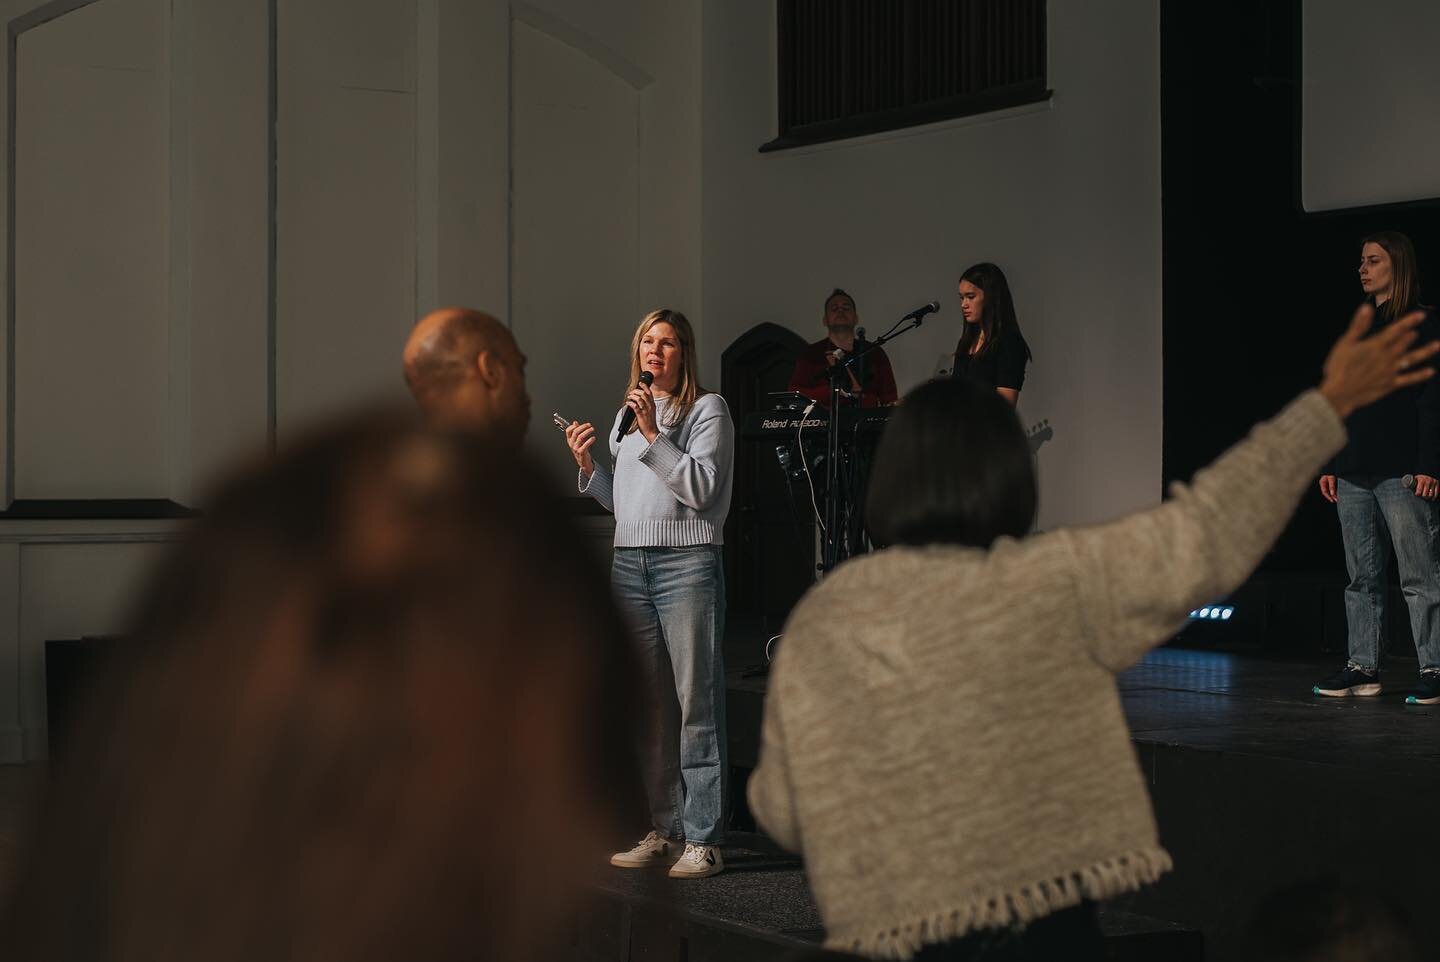 Join us as we worship Jesus and learn more about Him through our series &ldquo;Faith, Love, and Hope&rdquo; from the book of 1 Thessalonians. Don&rsquo;t forget to invite a friend!

.
Pre-service prayer will start at 9:25am⁠ in the multi-purpose room